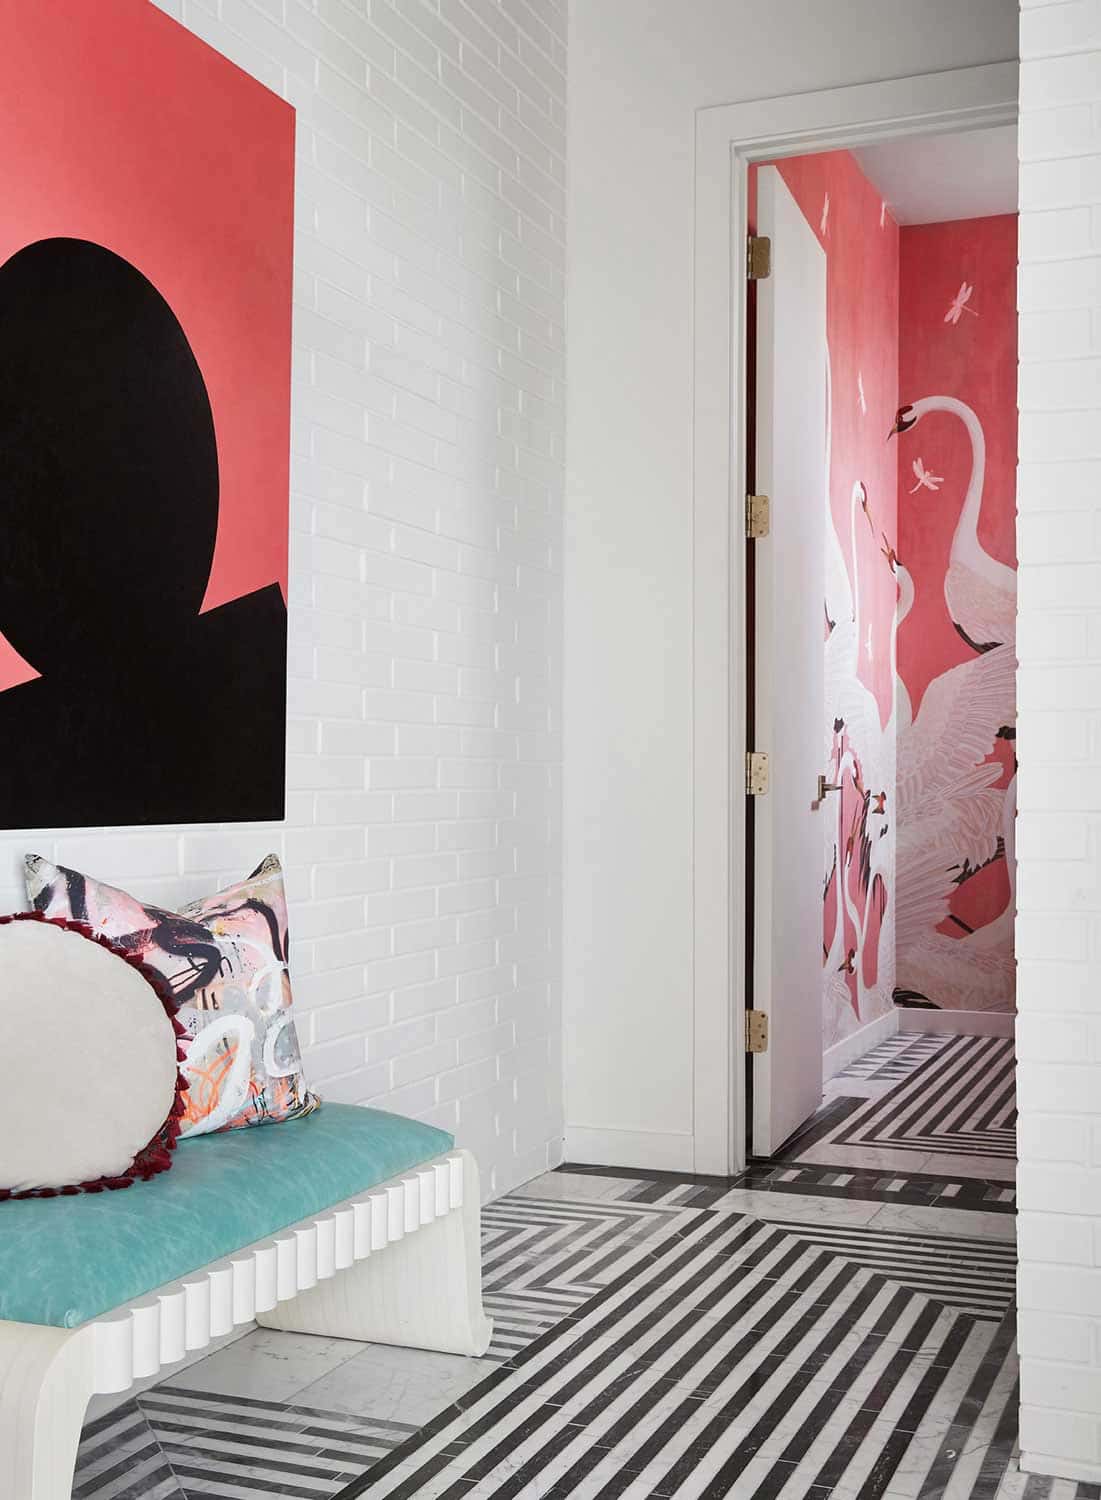 Off the foyer is a powder room with walls covered in pink Gucci swan wallpaper